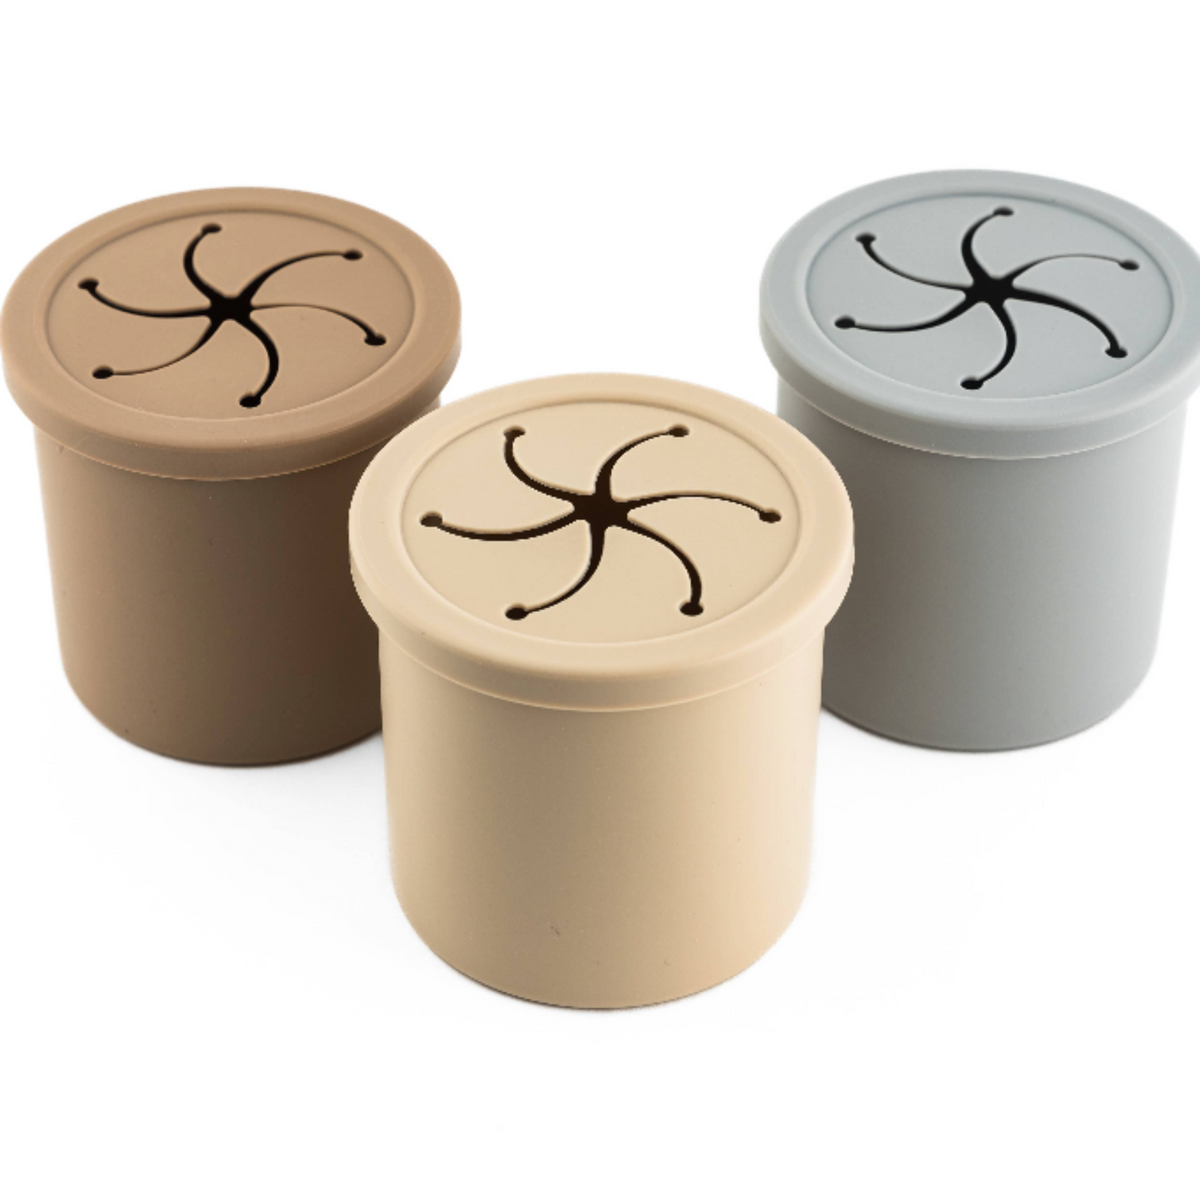 2 in 1 Straw Cup and Snack Container - Cool Tones: Brown